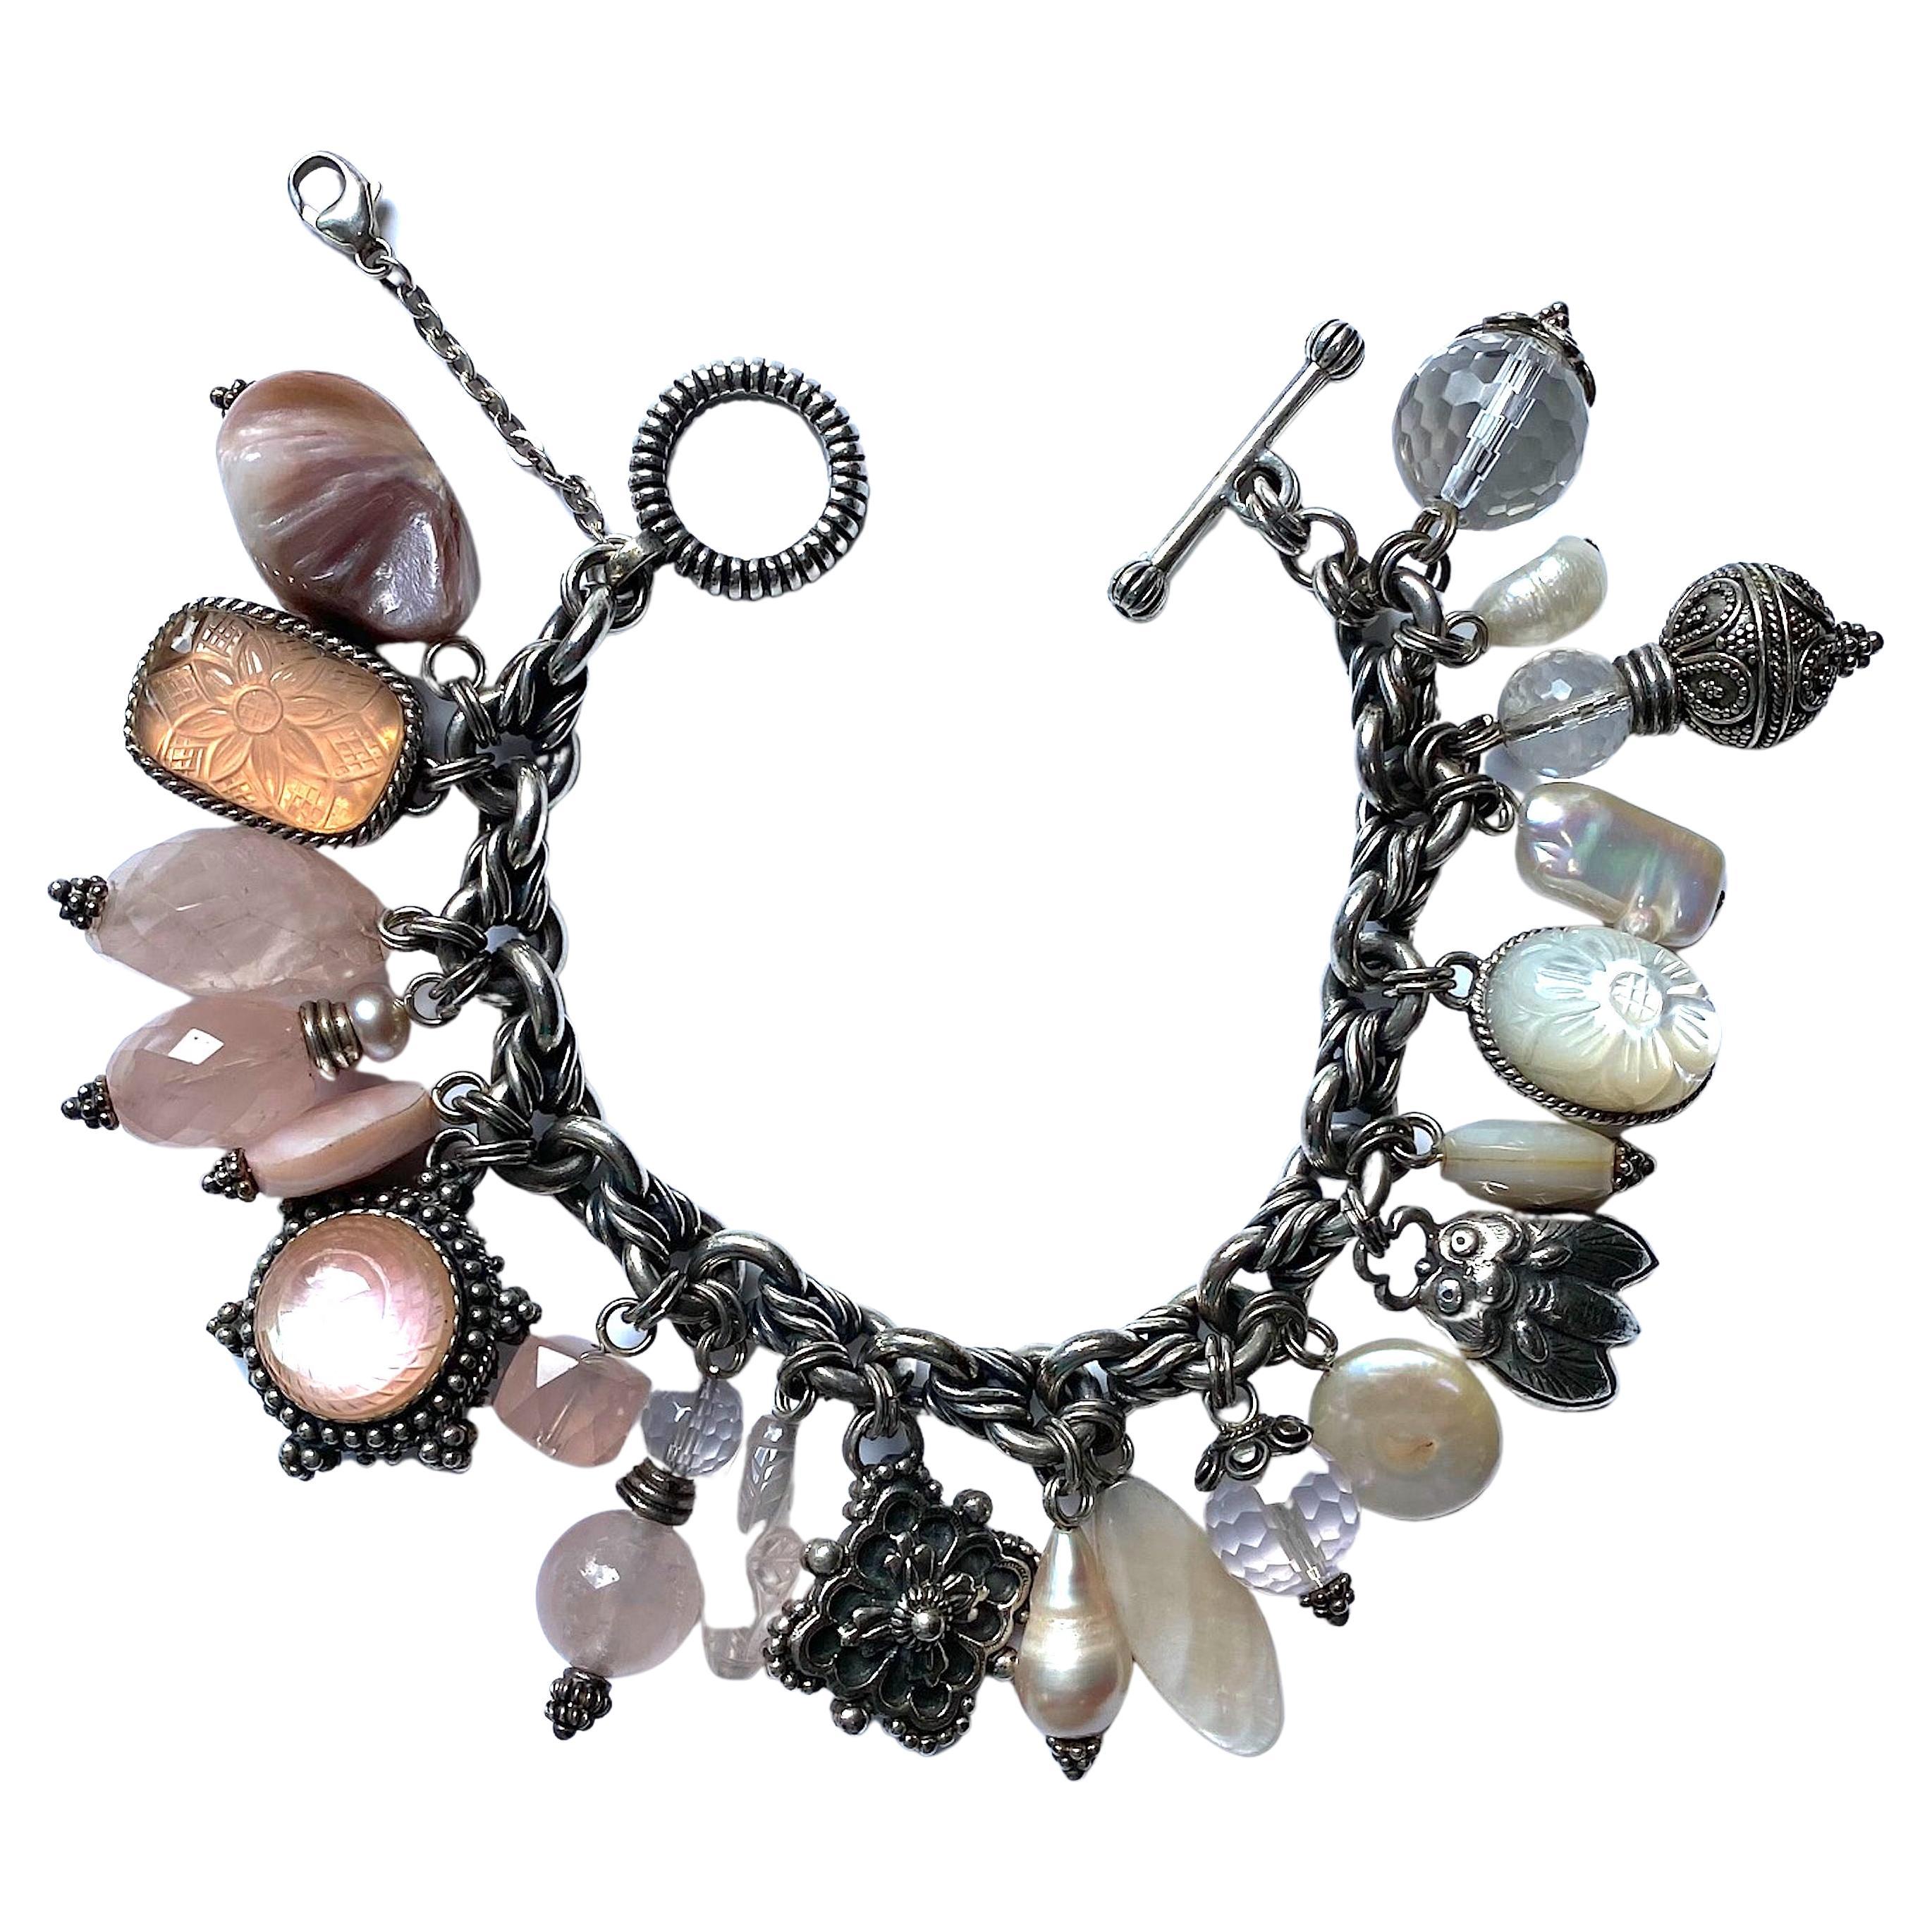 A lovely and fully loaded charm bracelet by famous jewelry designer Stephen Dweck. It features various size and shape faceted rose quarts and rock crystal bead, natural biwa and fresh water pearls, mother of pearl and sterling silver charms. The